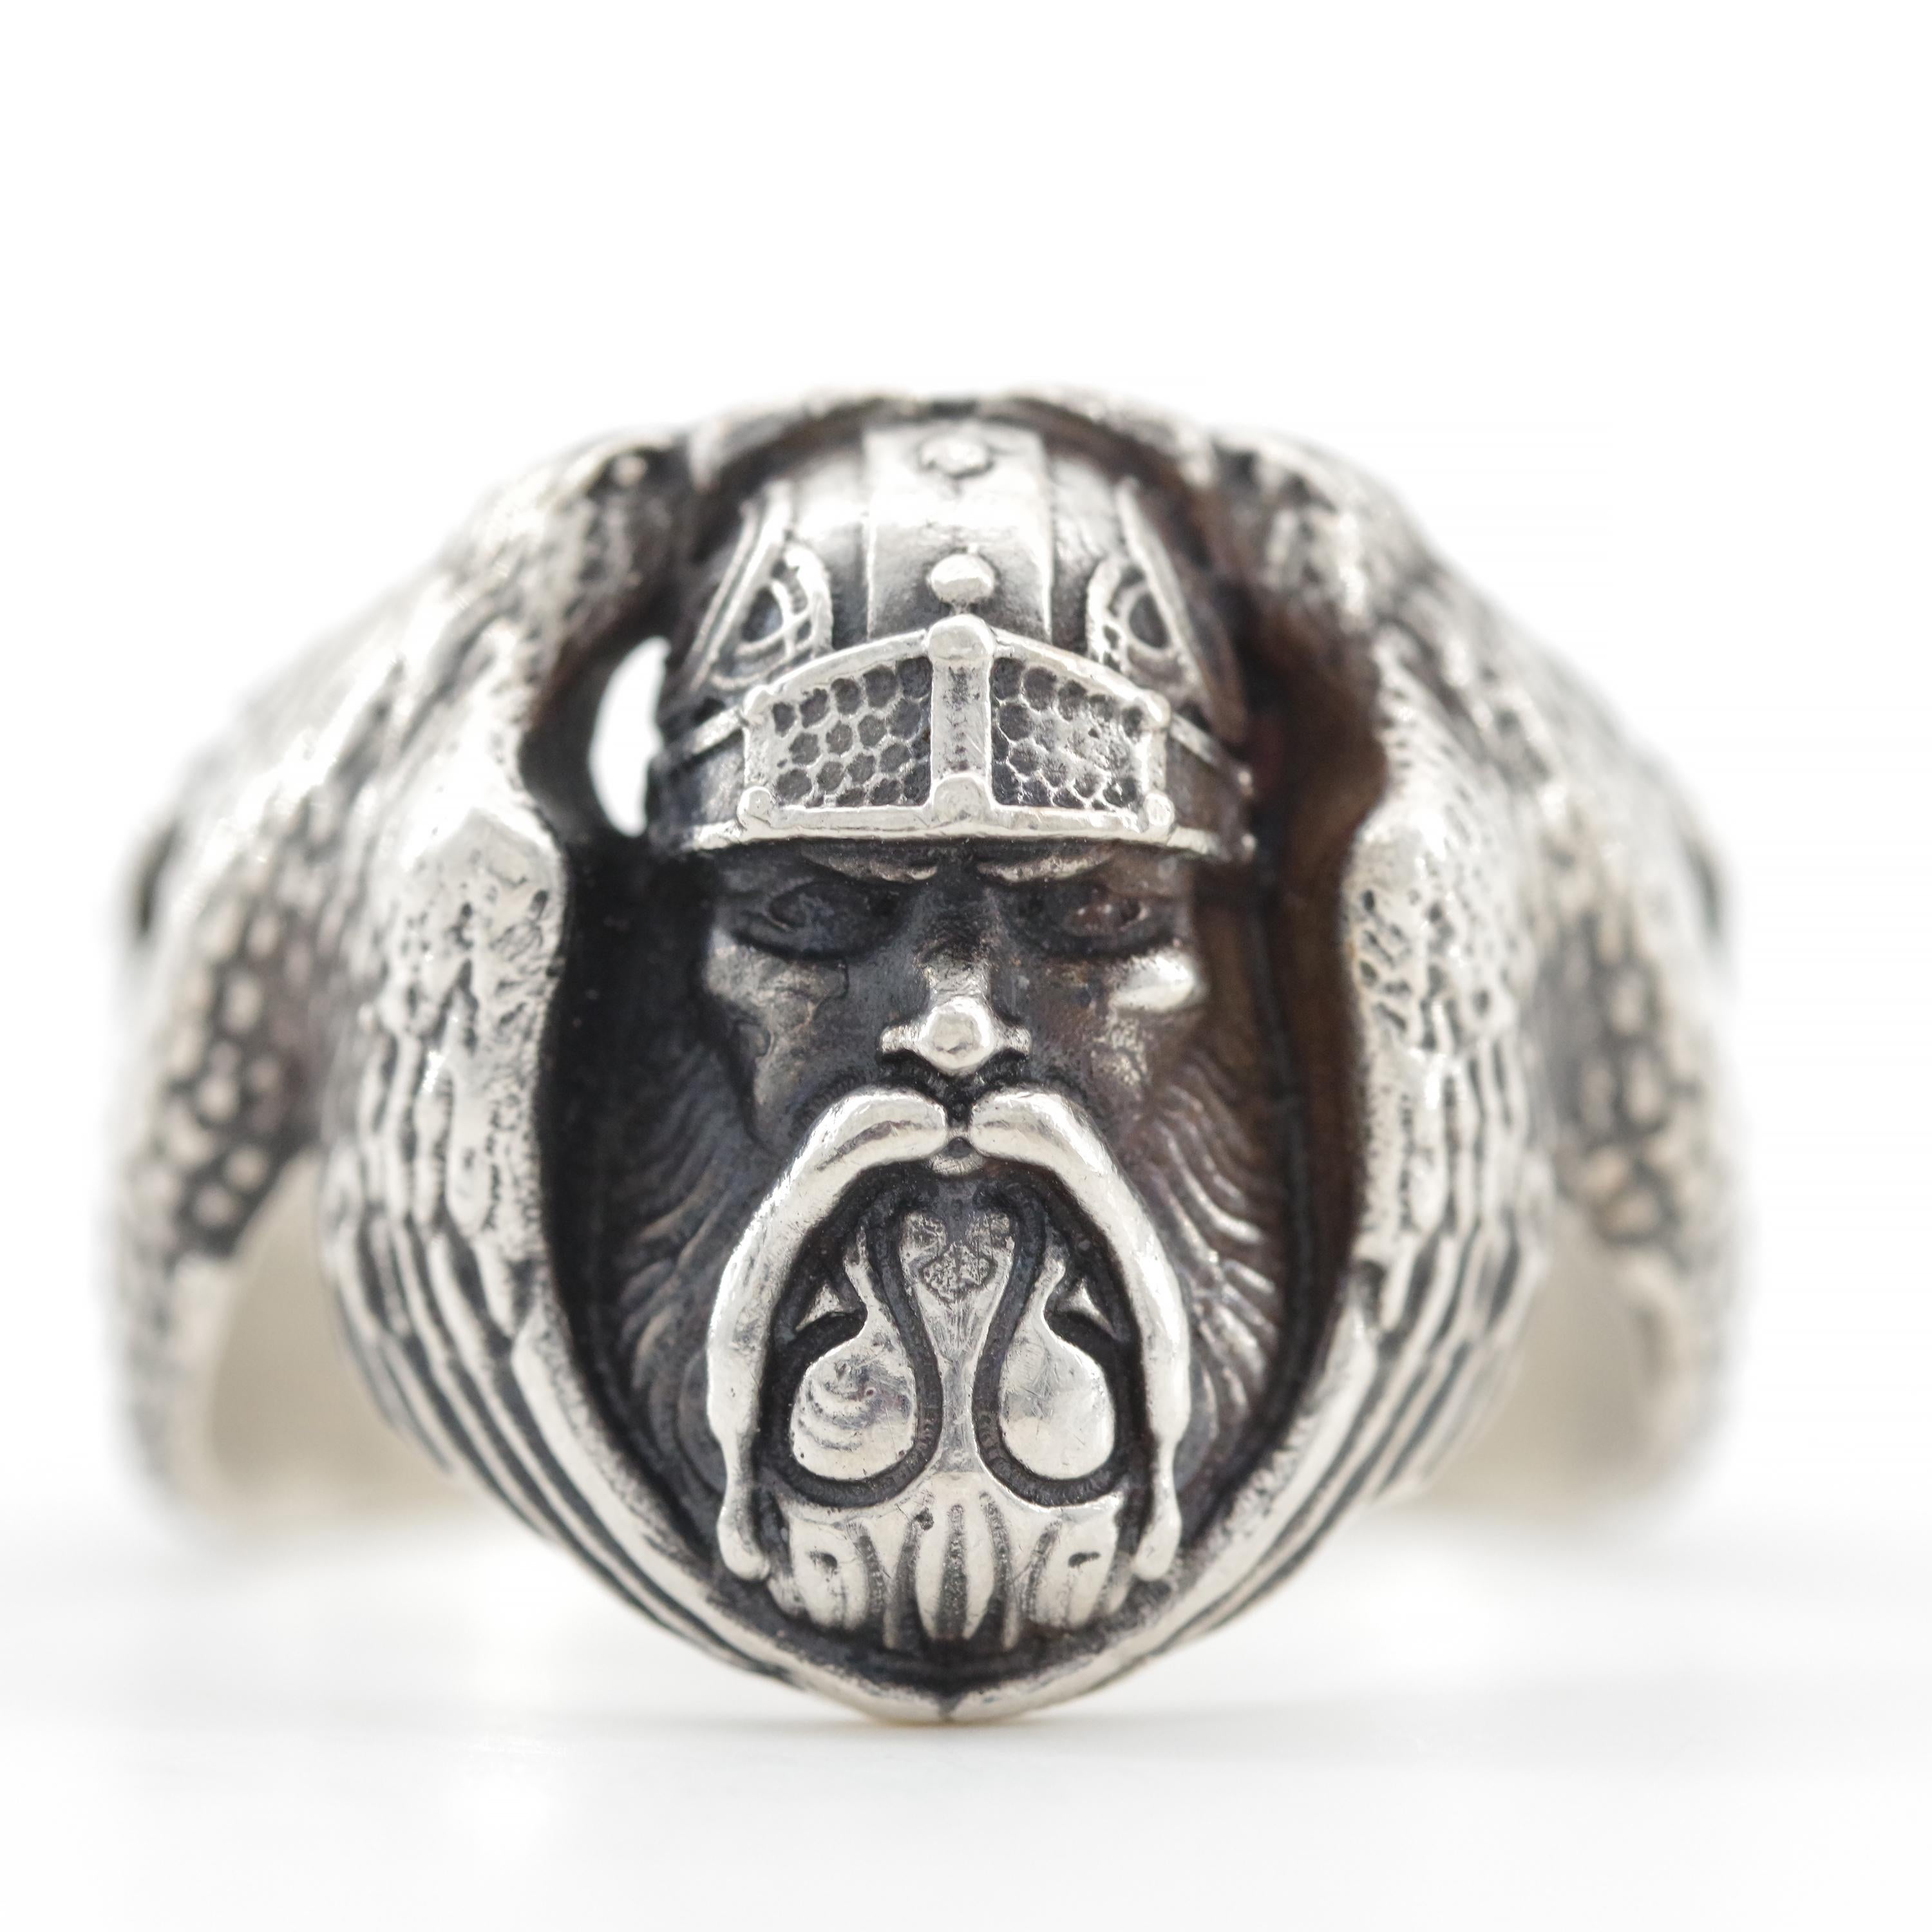 Figural Ring Depicting Odin the Norse God circa 1930 is Beyond Rare 1